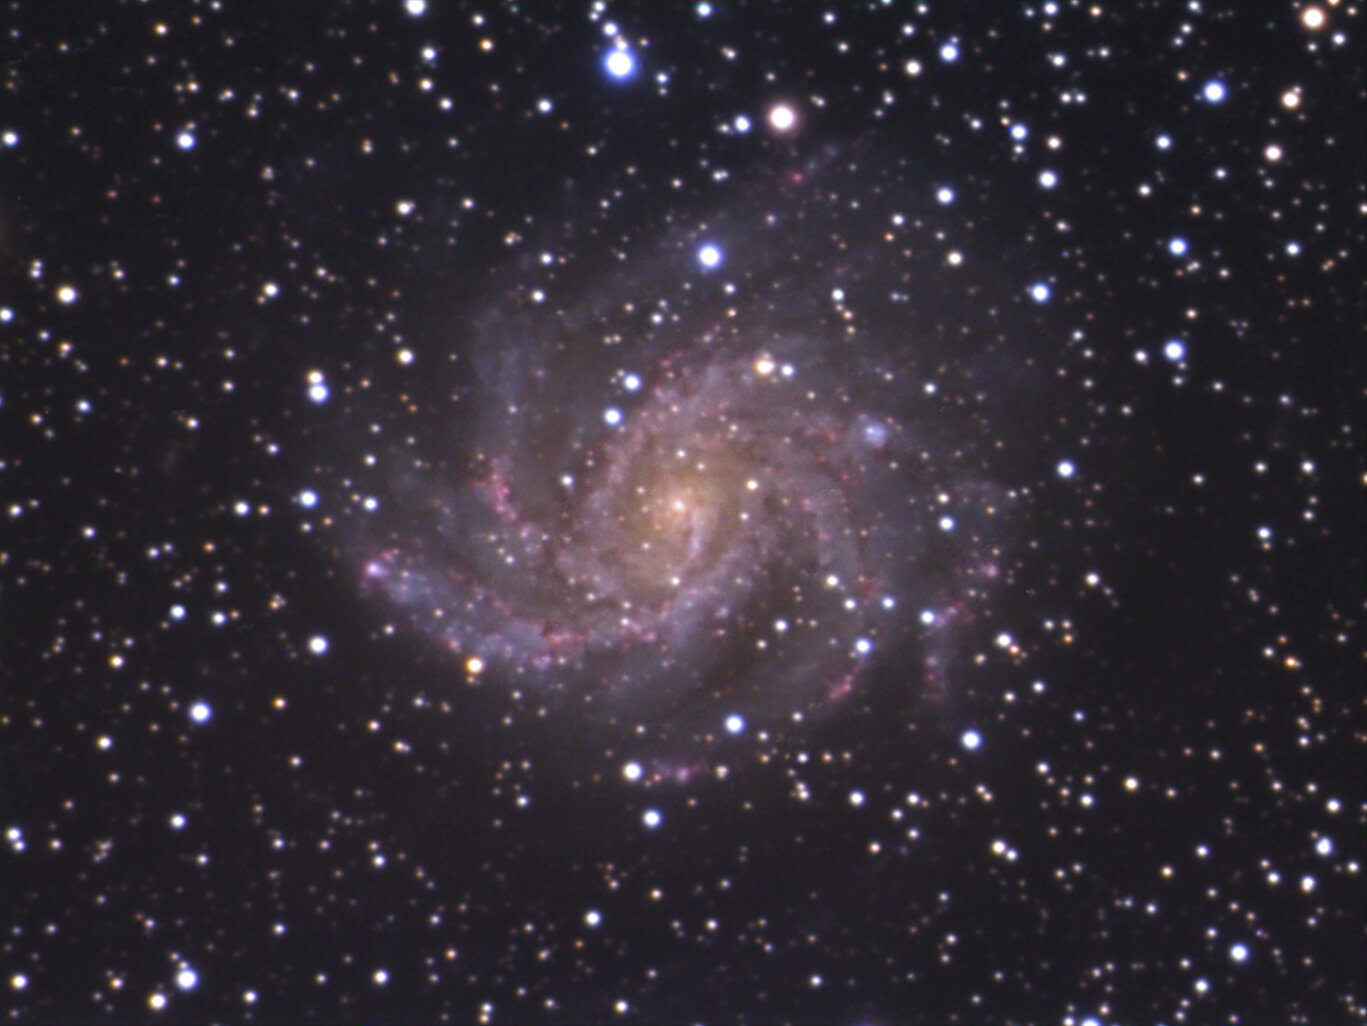 NGC 6946 The 'Fireworks' Galaxy